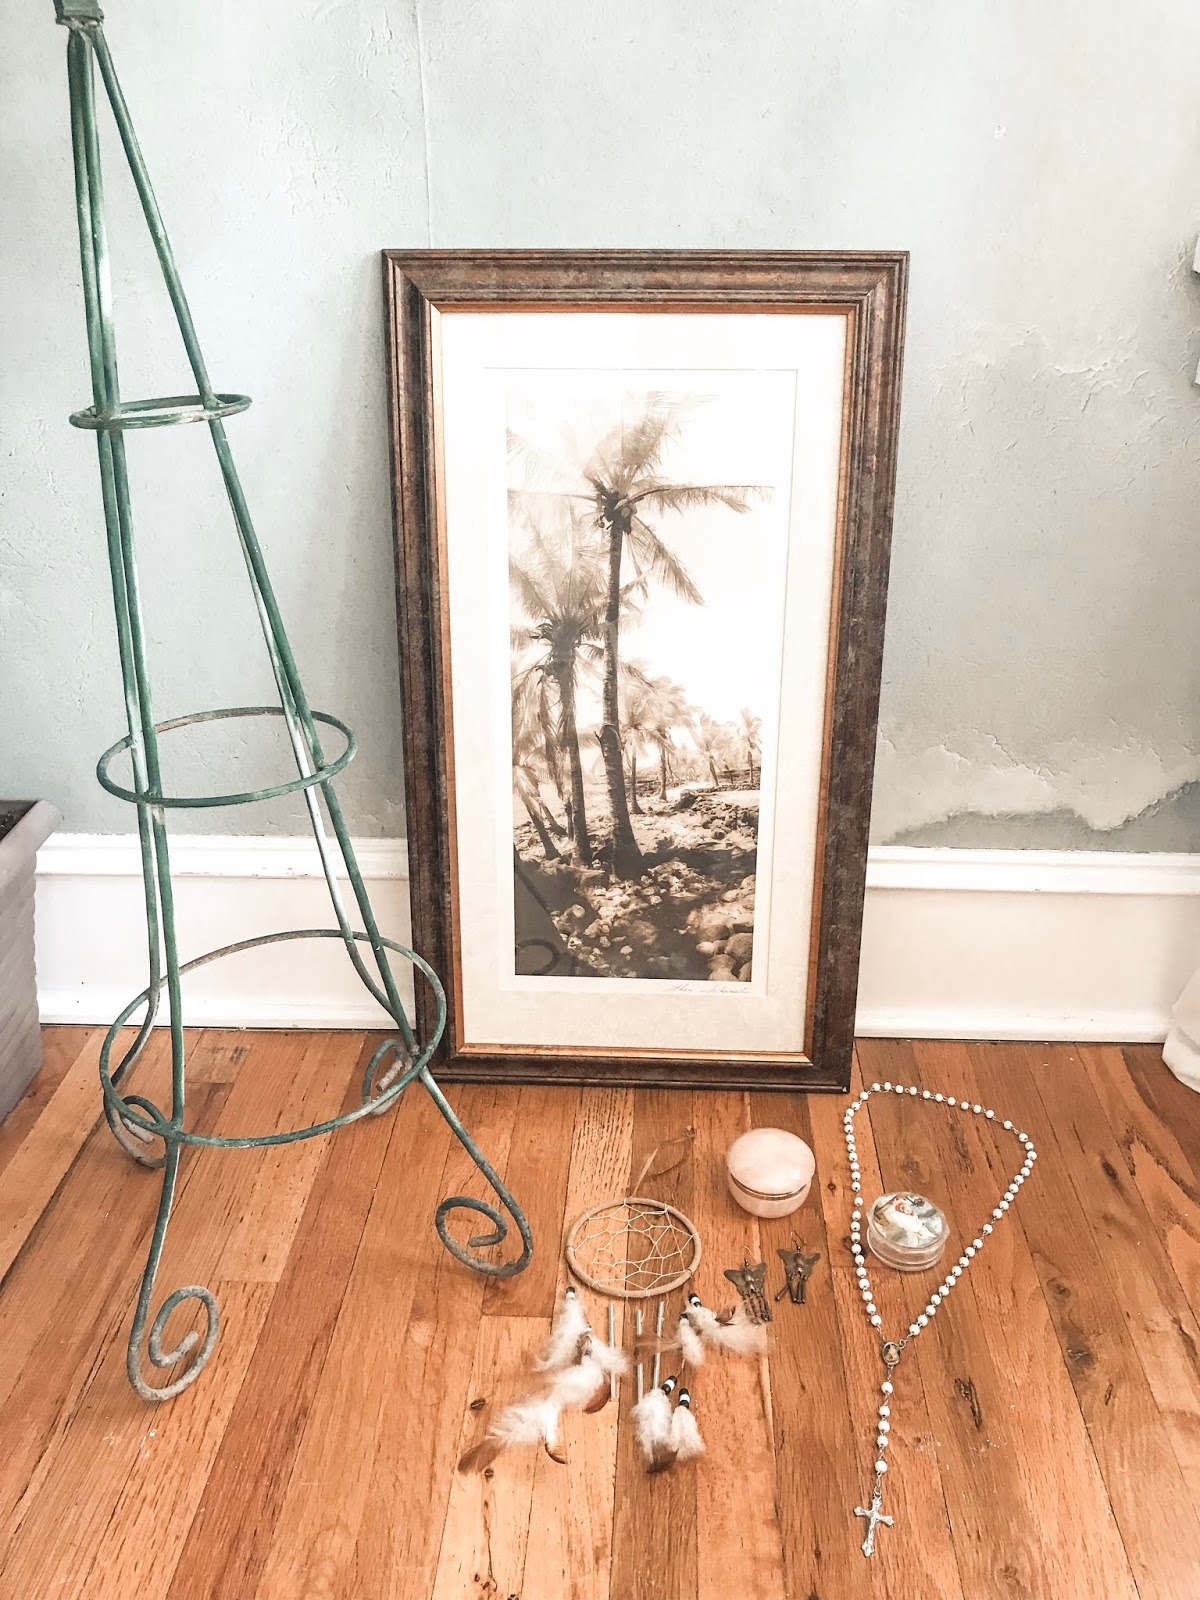 Yard Sale Finds and where I placed them in our Home – Part 2